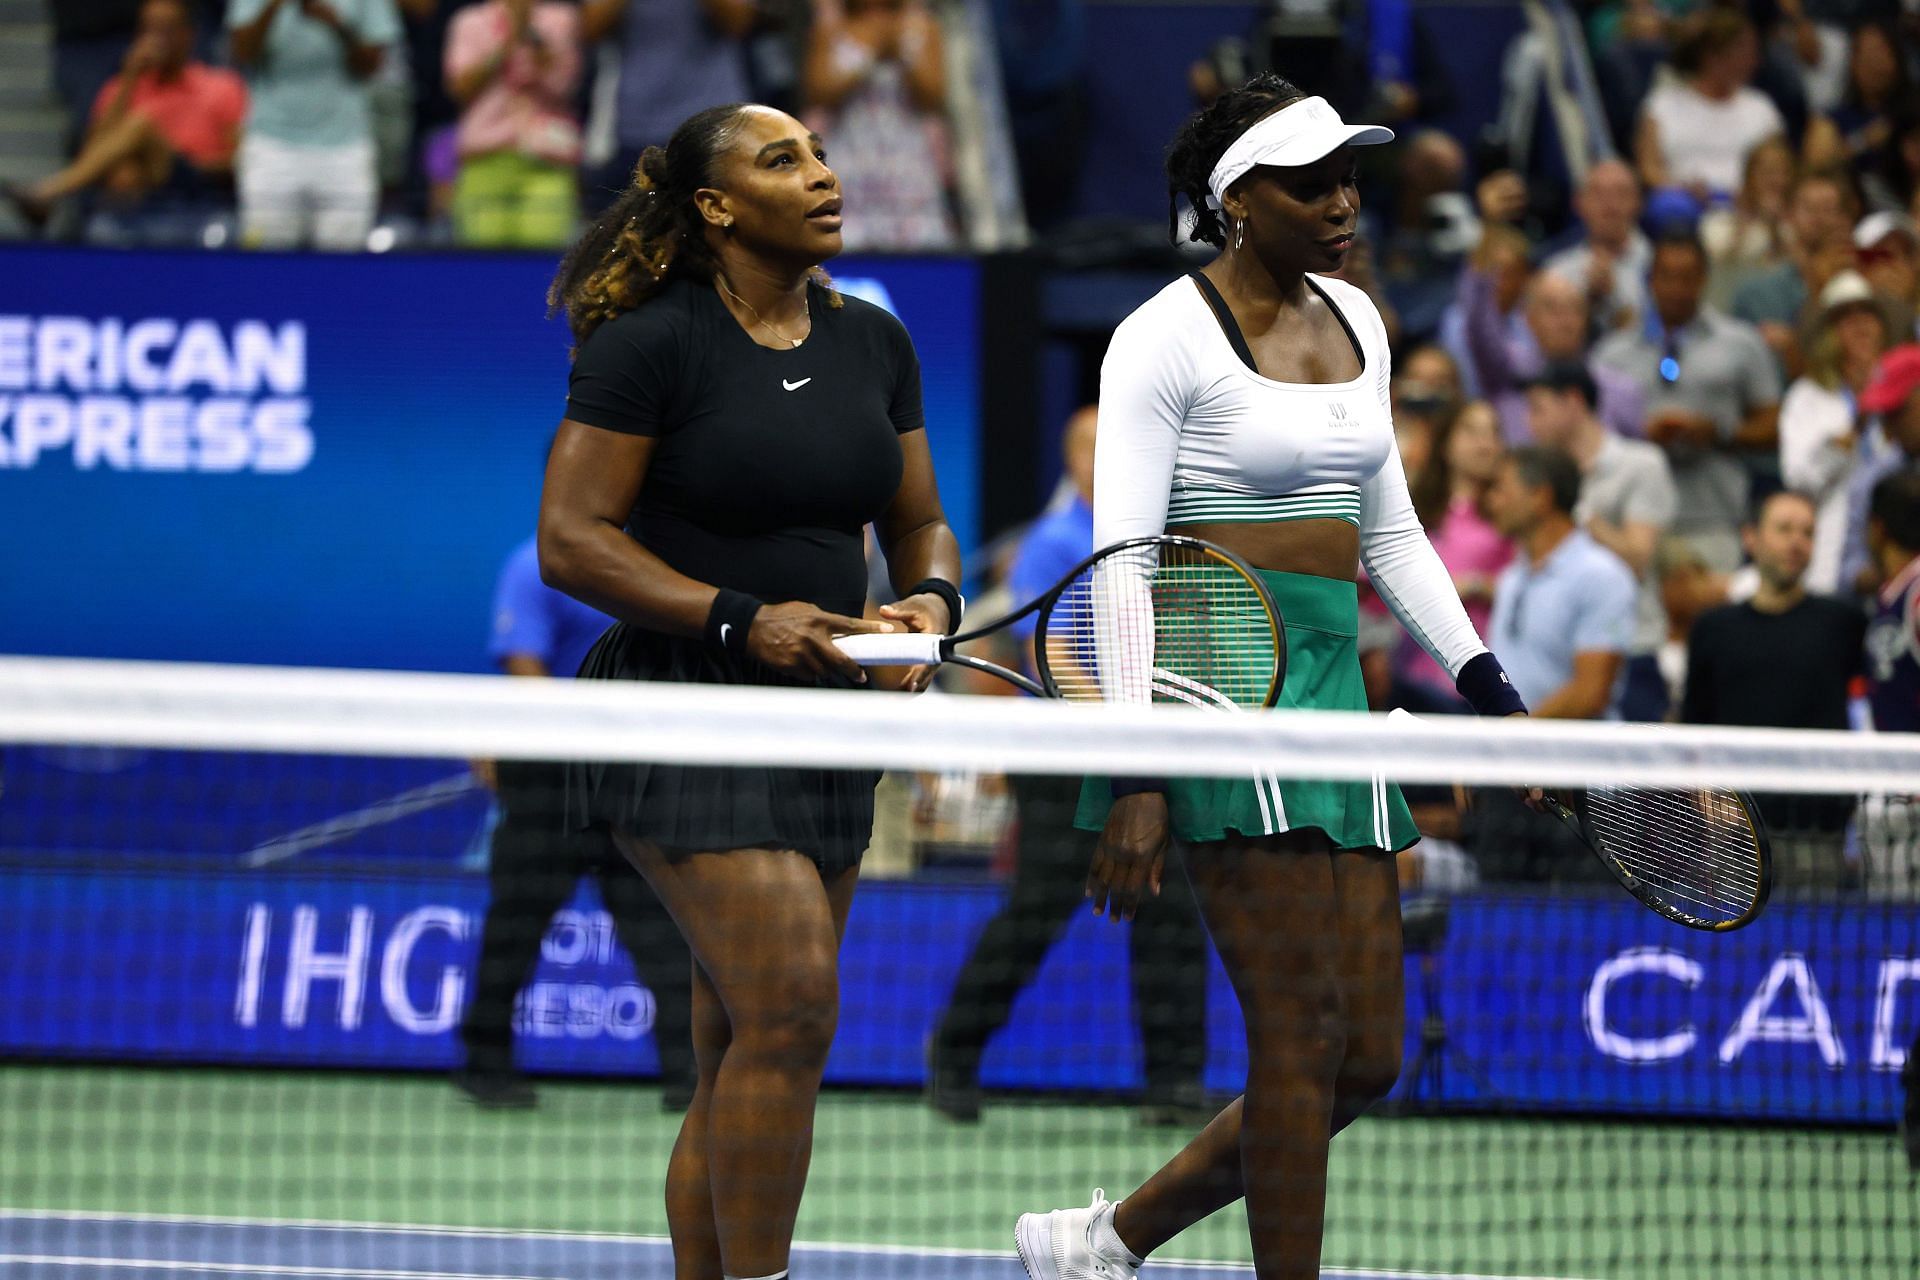 The Williams sisters pictured at the 2022 US Open